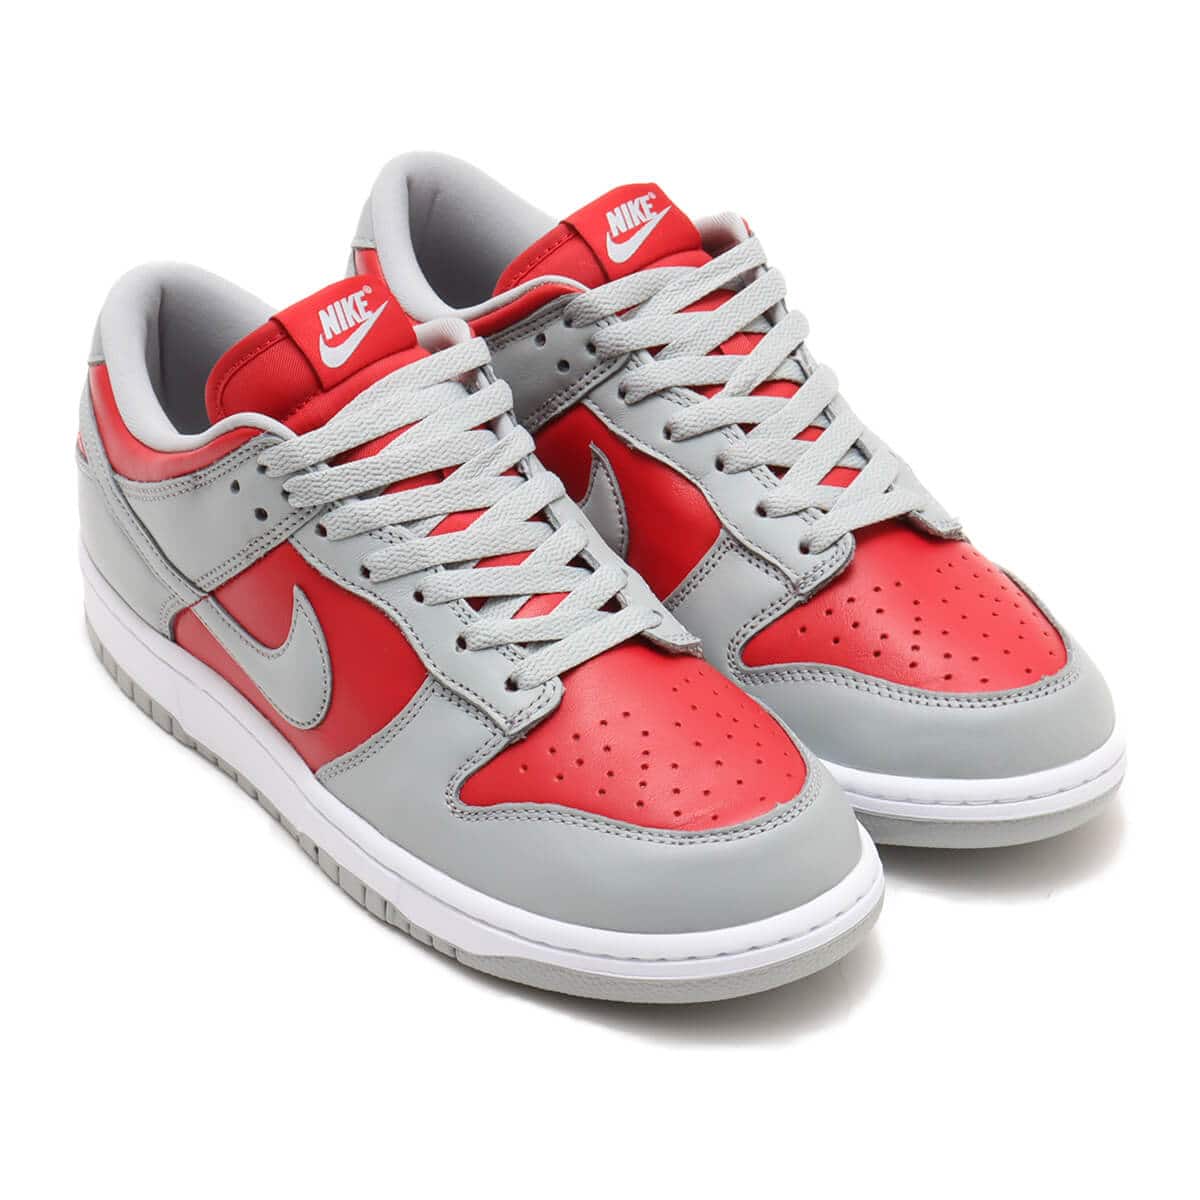 NIKE DUNK LOW QS VARSITY RED/SILVER-WHITE